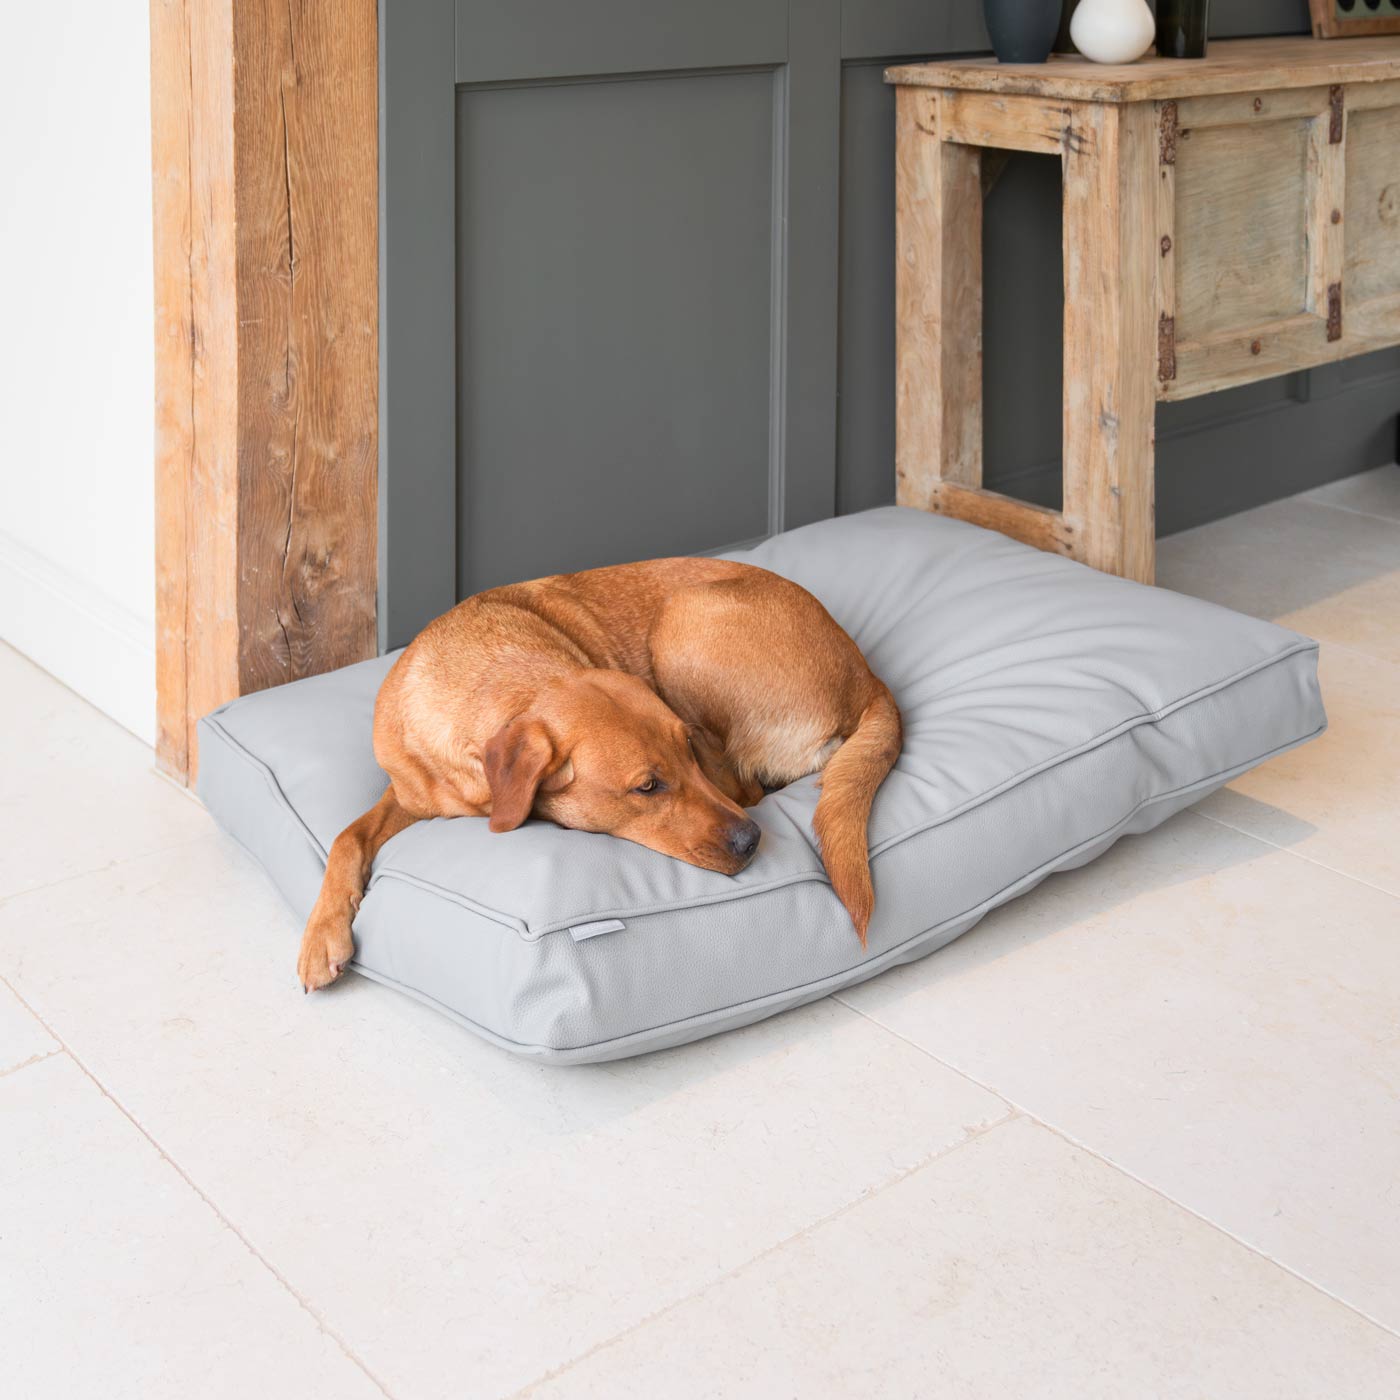 Luxury Dog Cushion in Rhino Tough Jungle Granite Faux Leather, The Perfect Pet Bed Time Accessory! Available Now at Lords & Labradors US